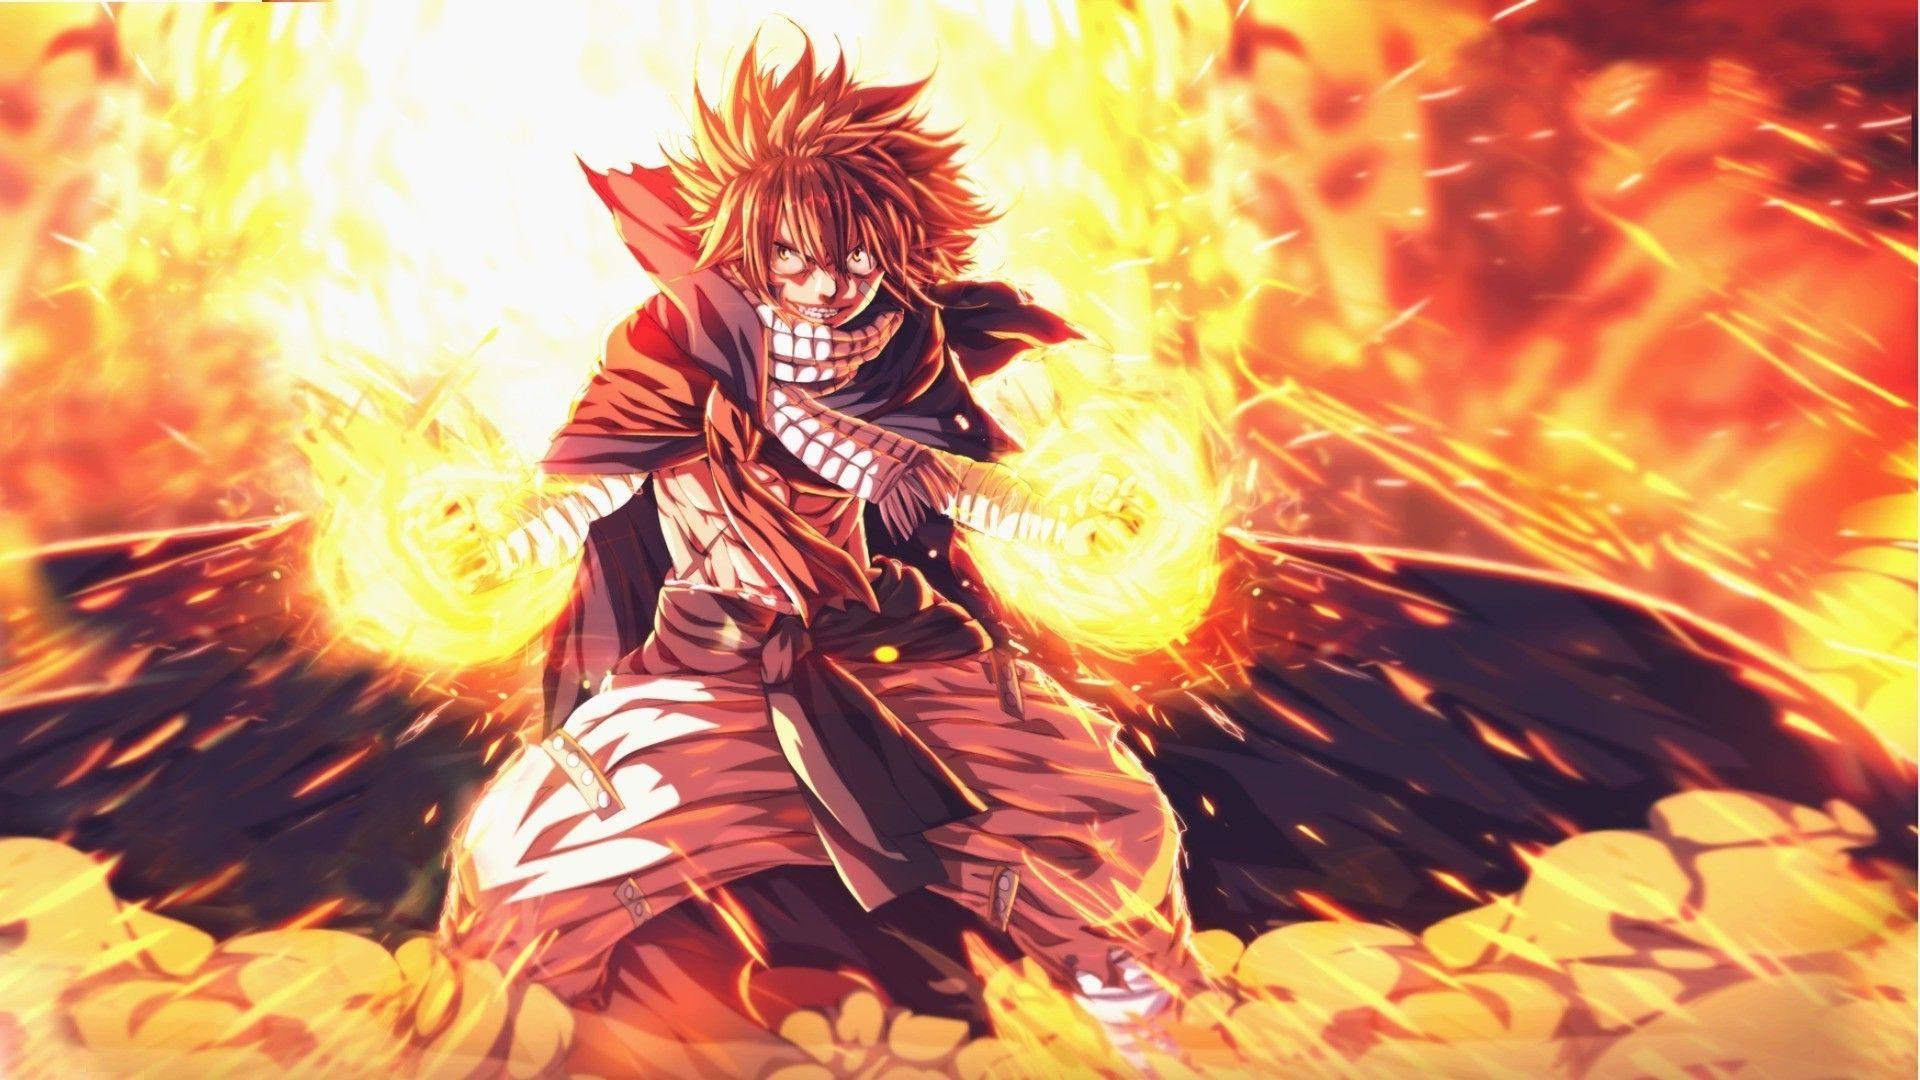 Fairy Tail 2016 Wallpapers